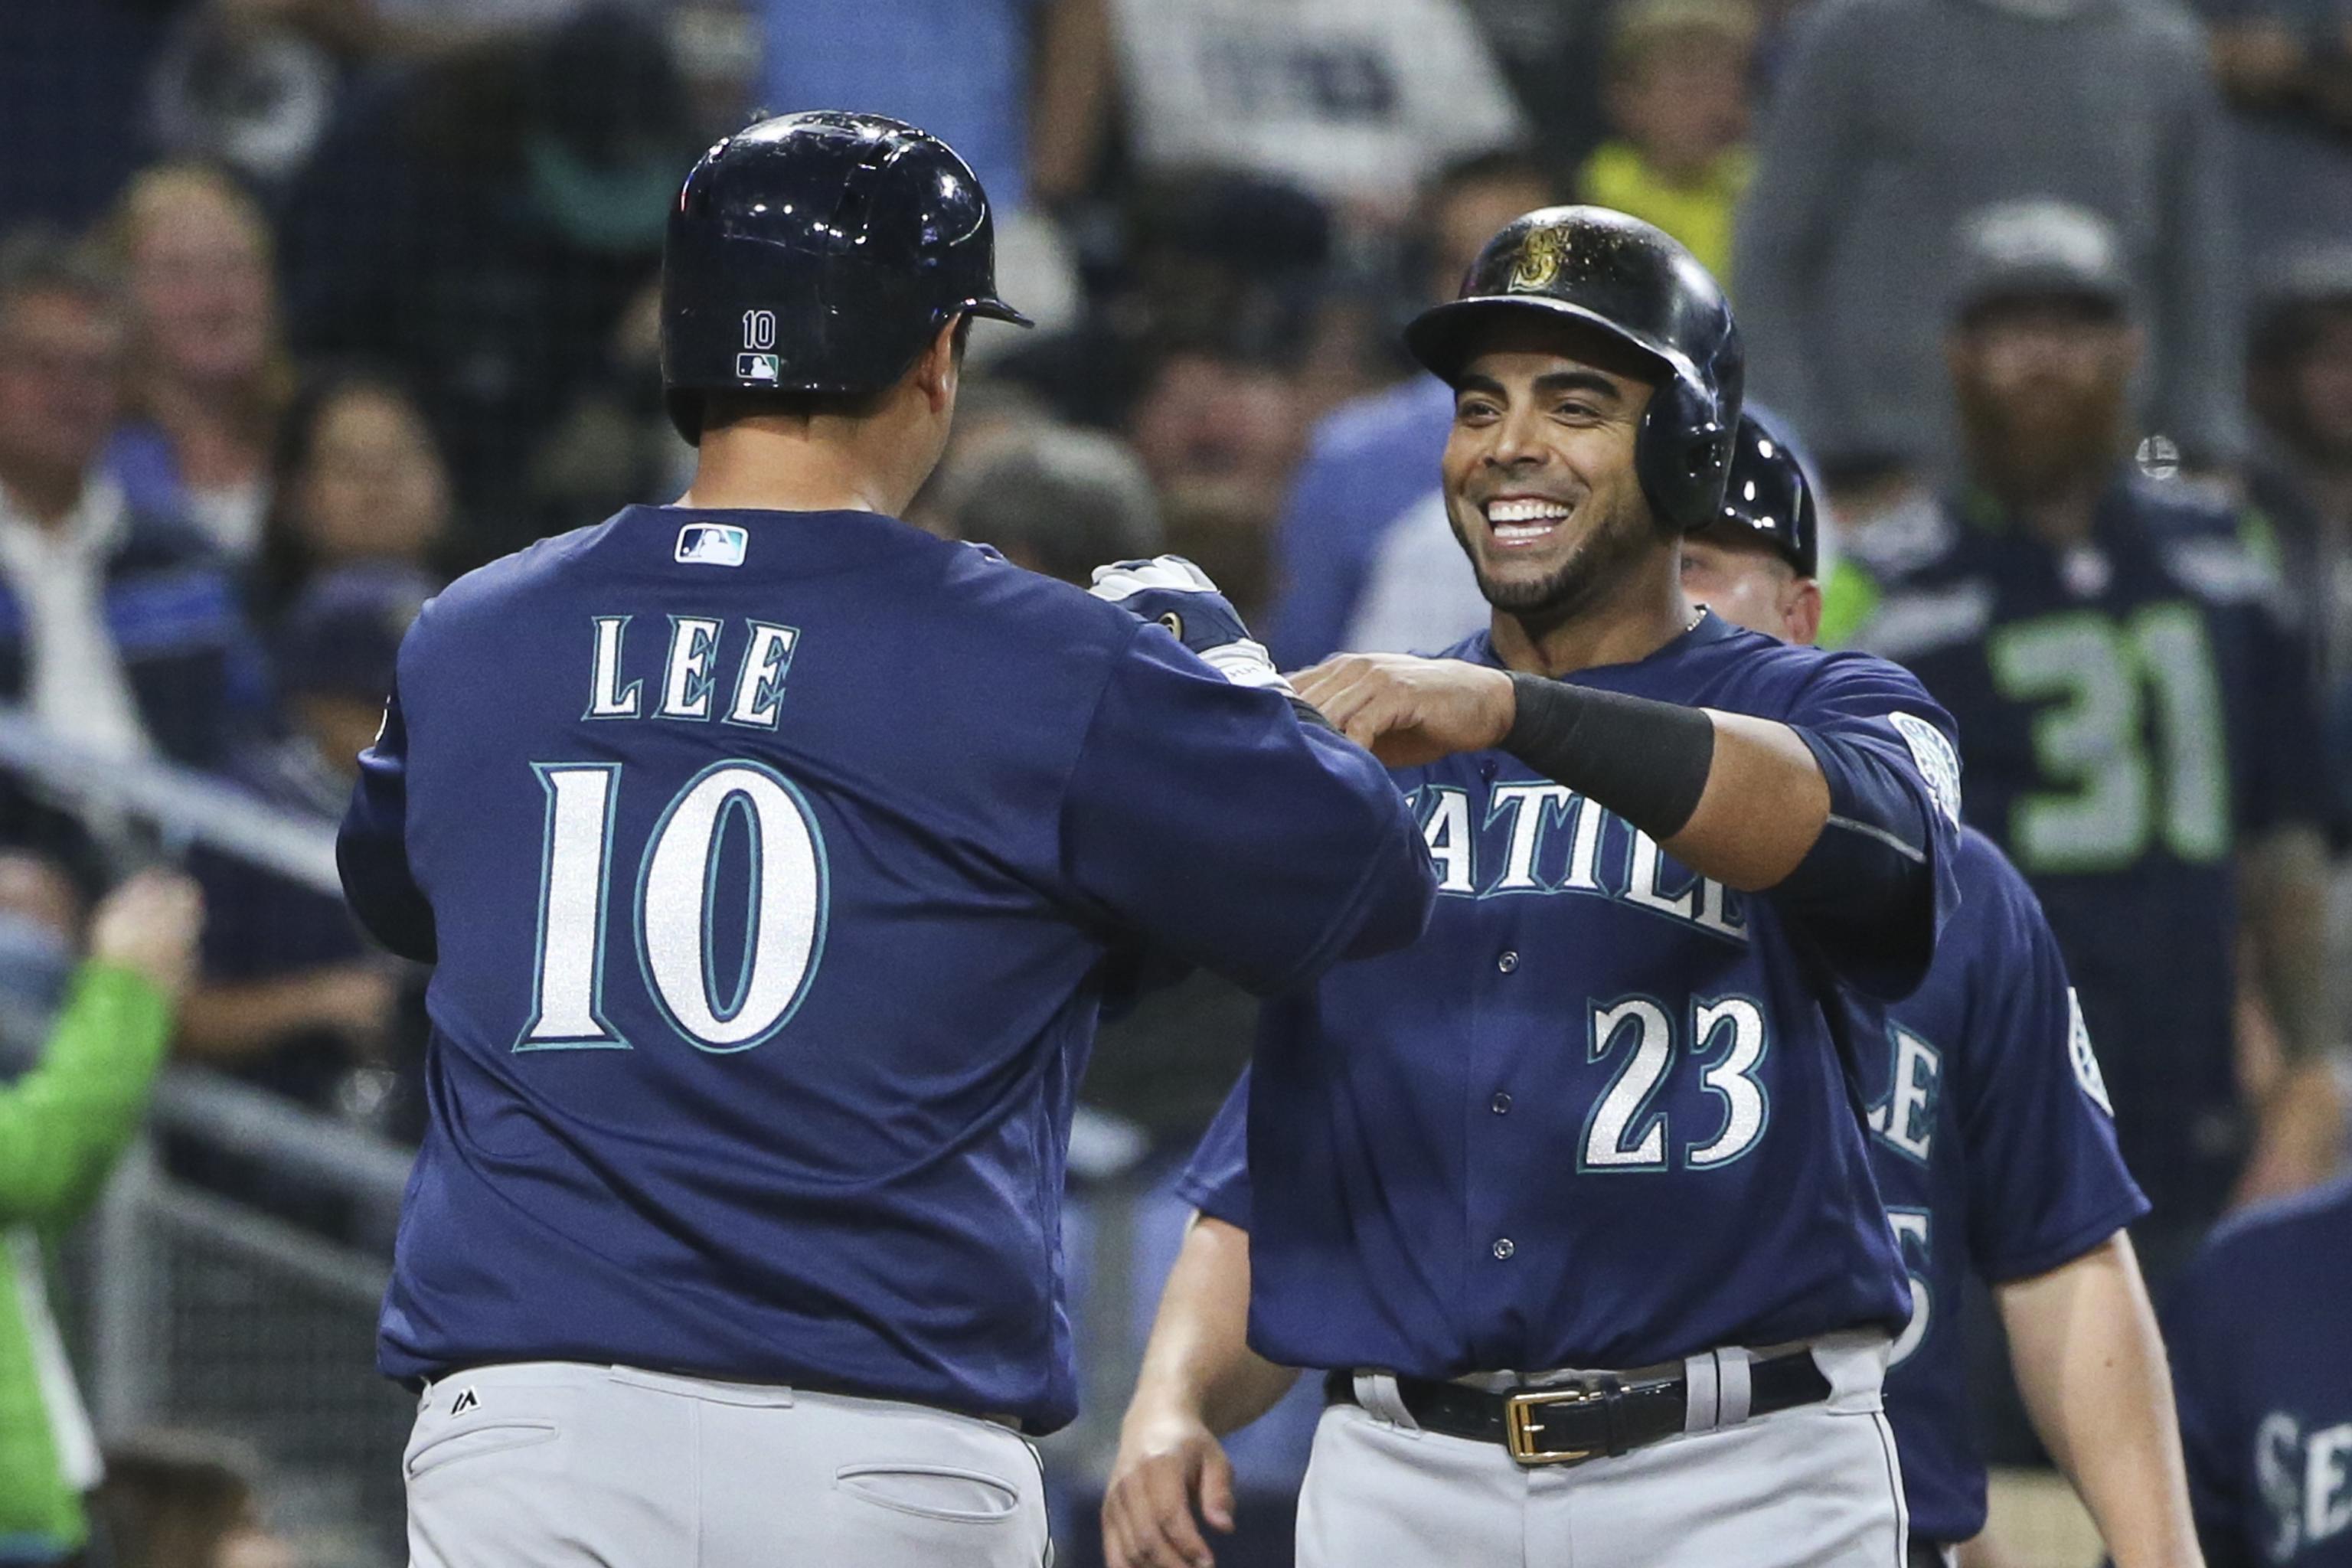 Mariners Record 9 Hits in Win Against Padres, by Mariners PR